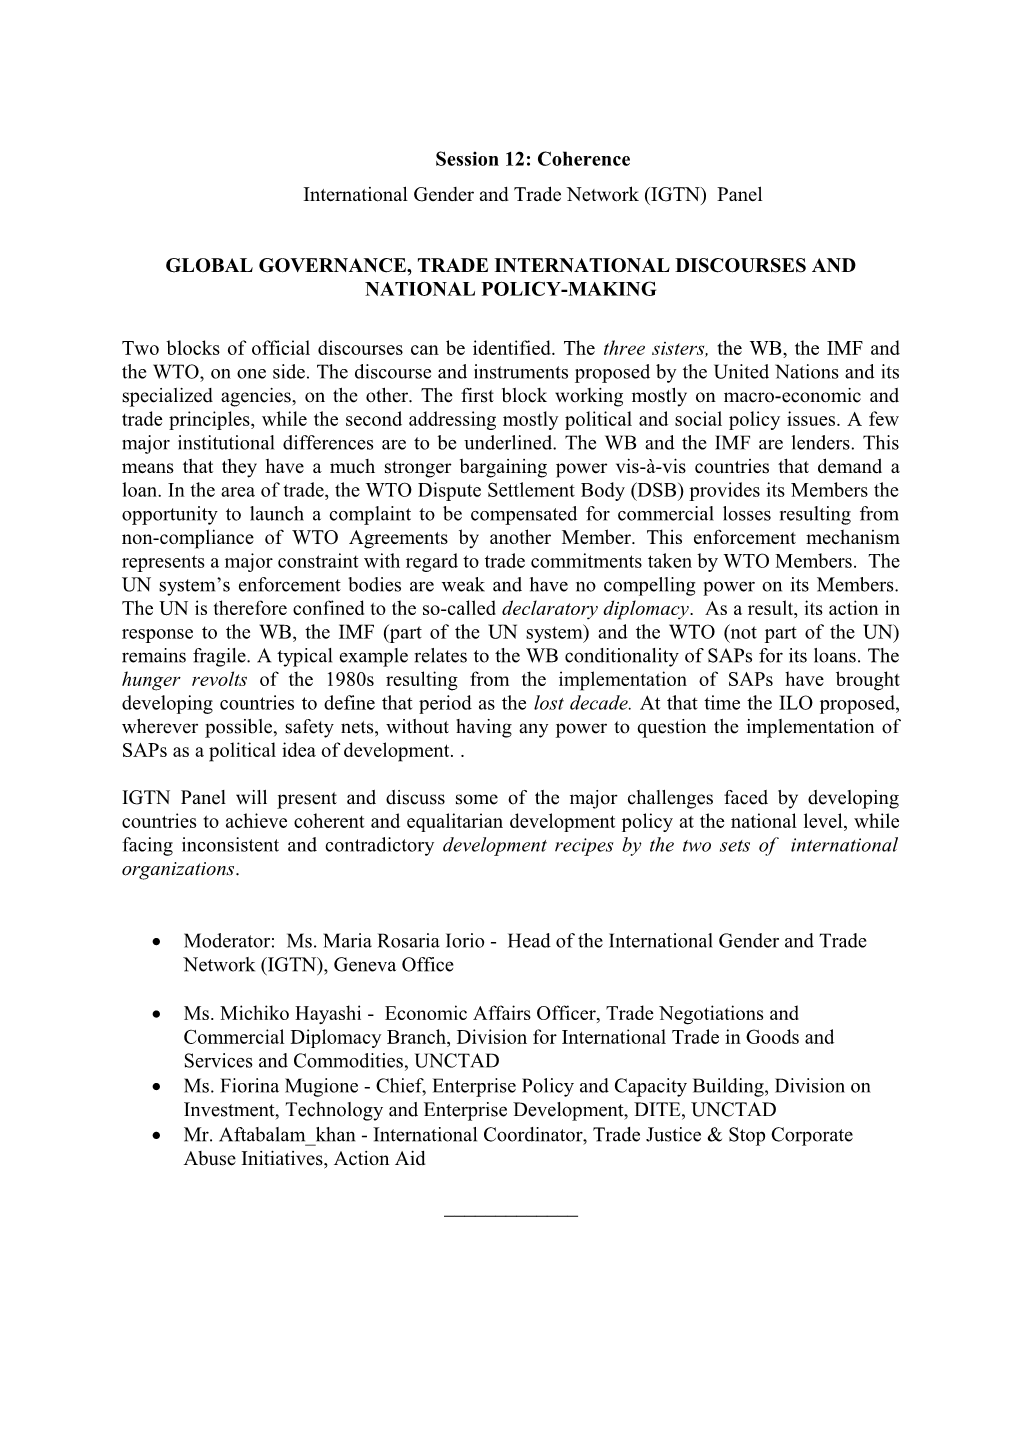 Summary of Igtn Panel on Global Governance, Trade International Discourses and National